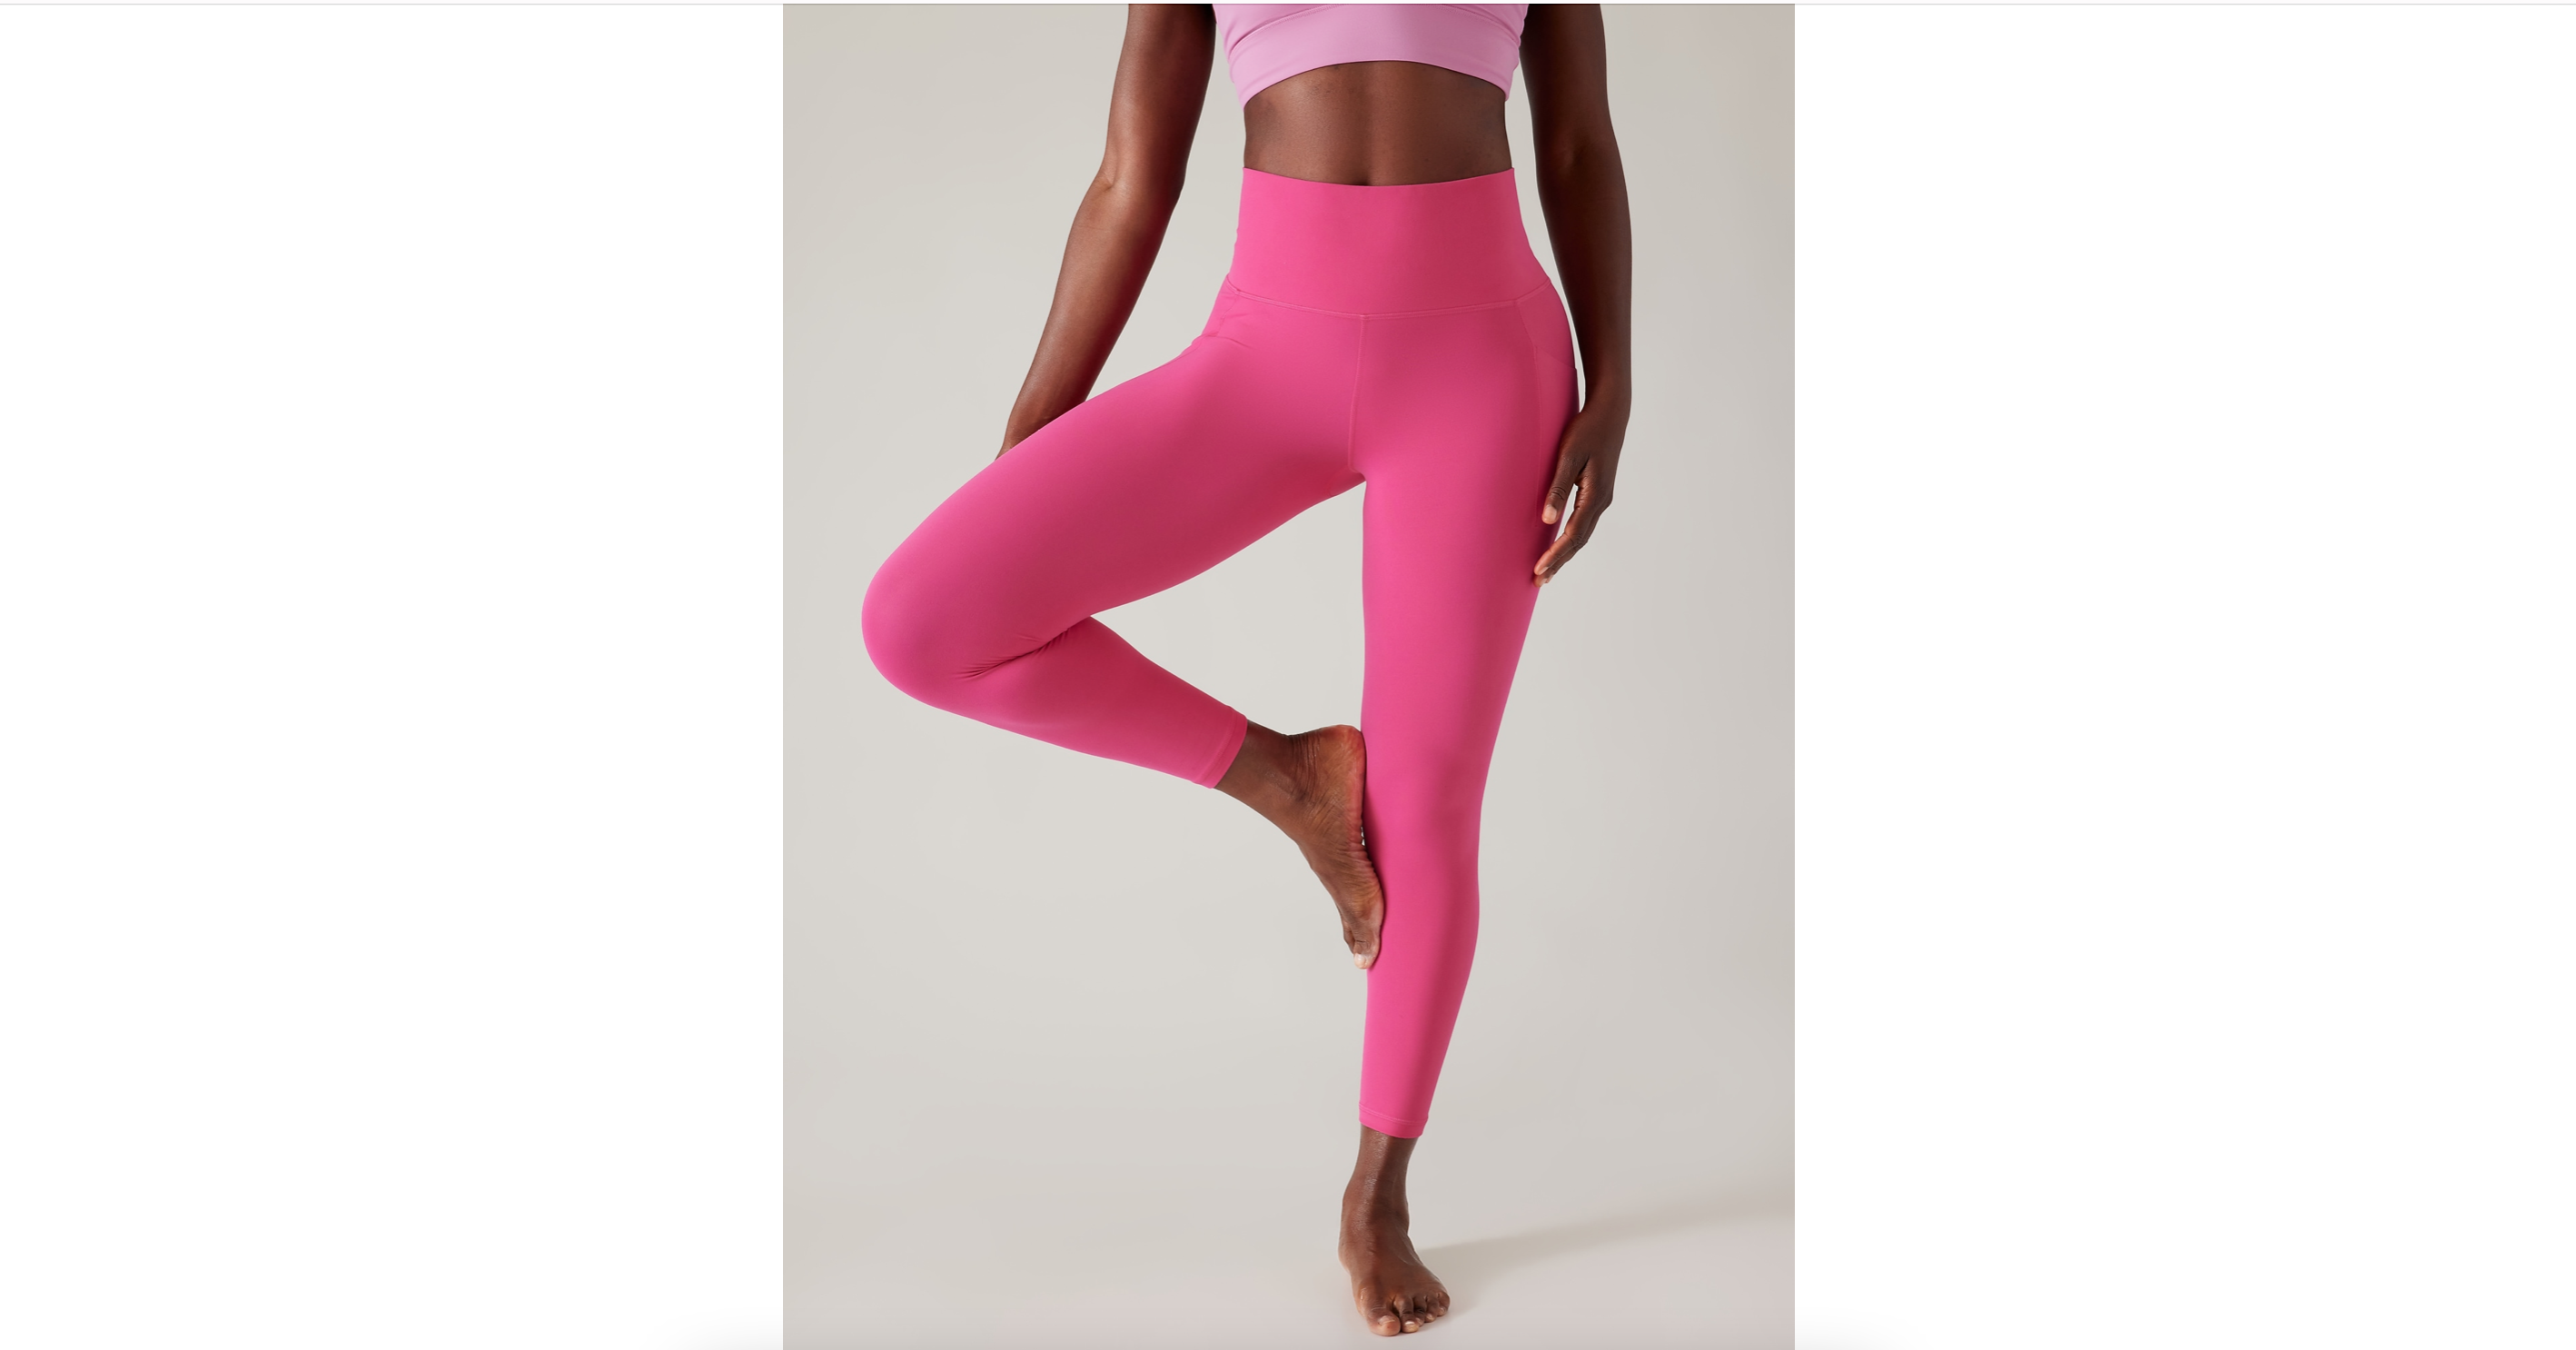 7/8 High-Waist Airbrush Legging in Electric Violet by Alo Yoga - Work Well  Daily